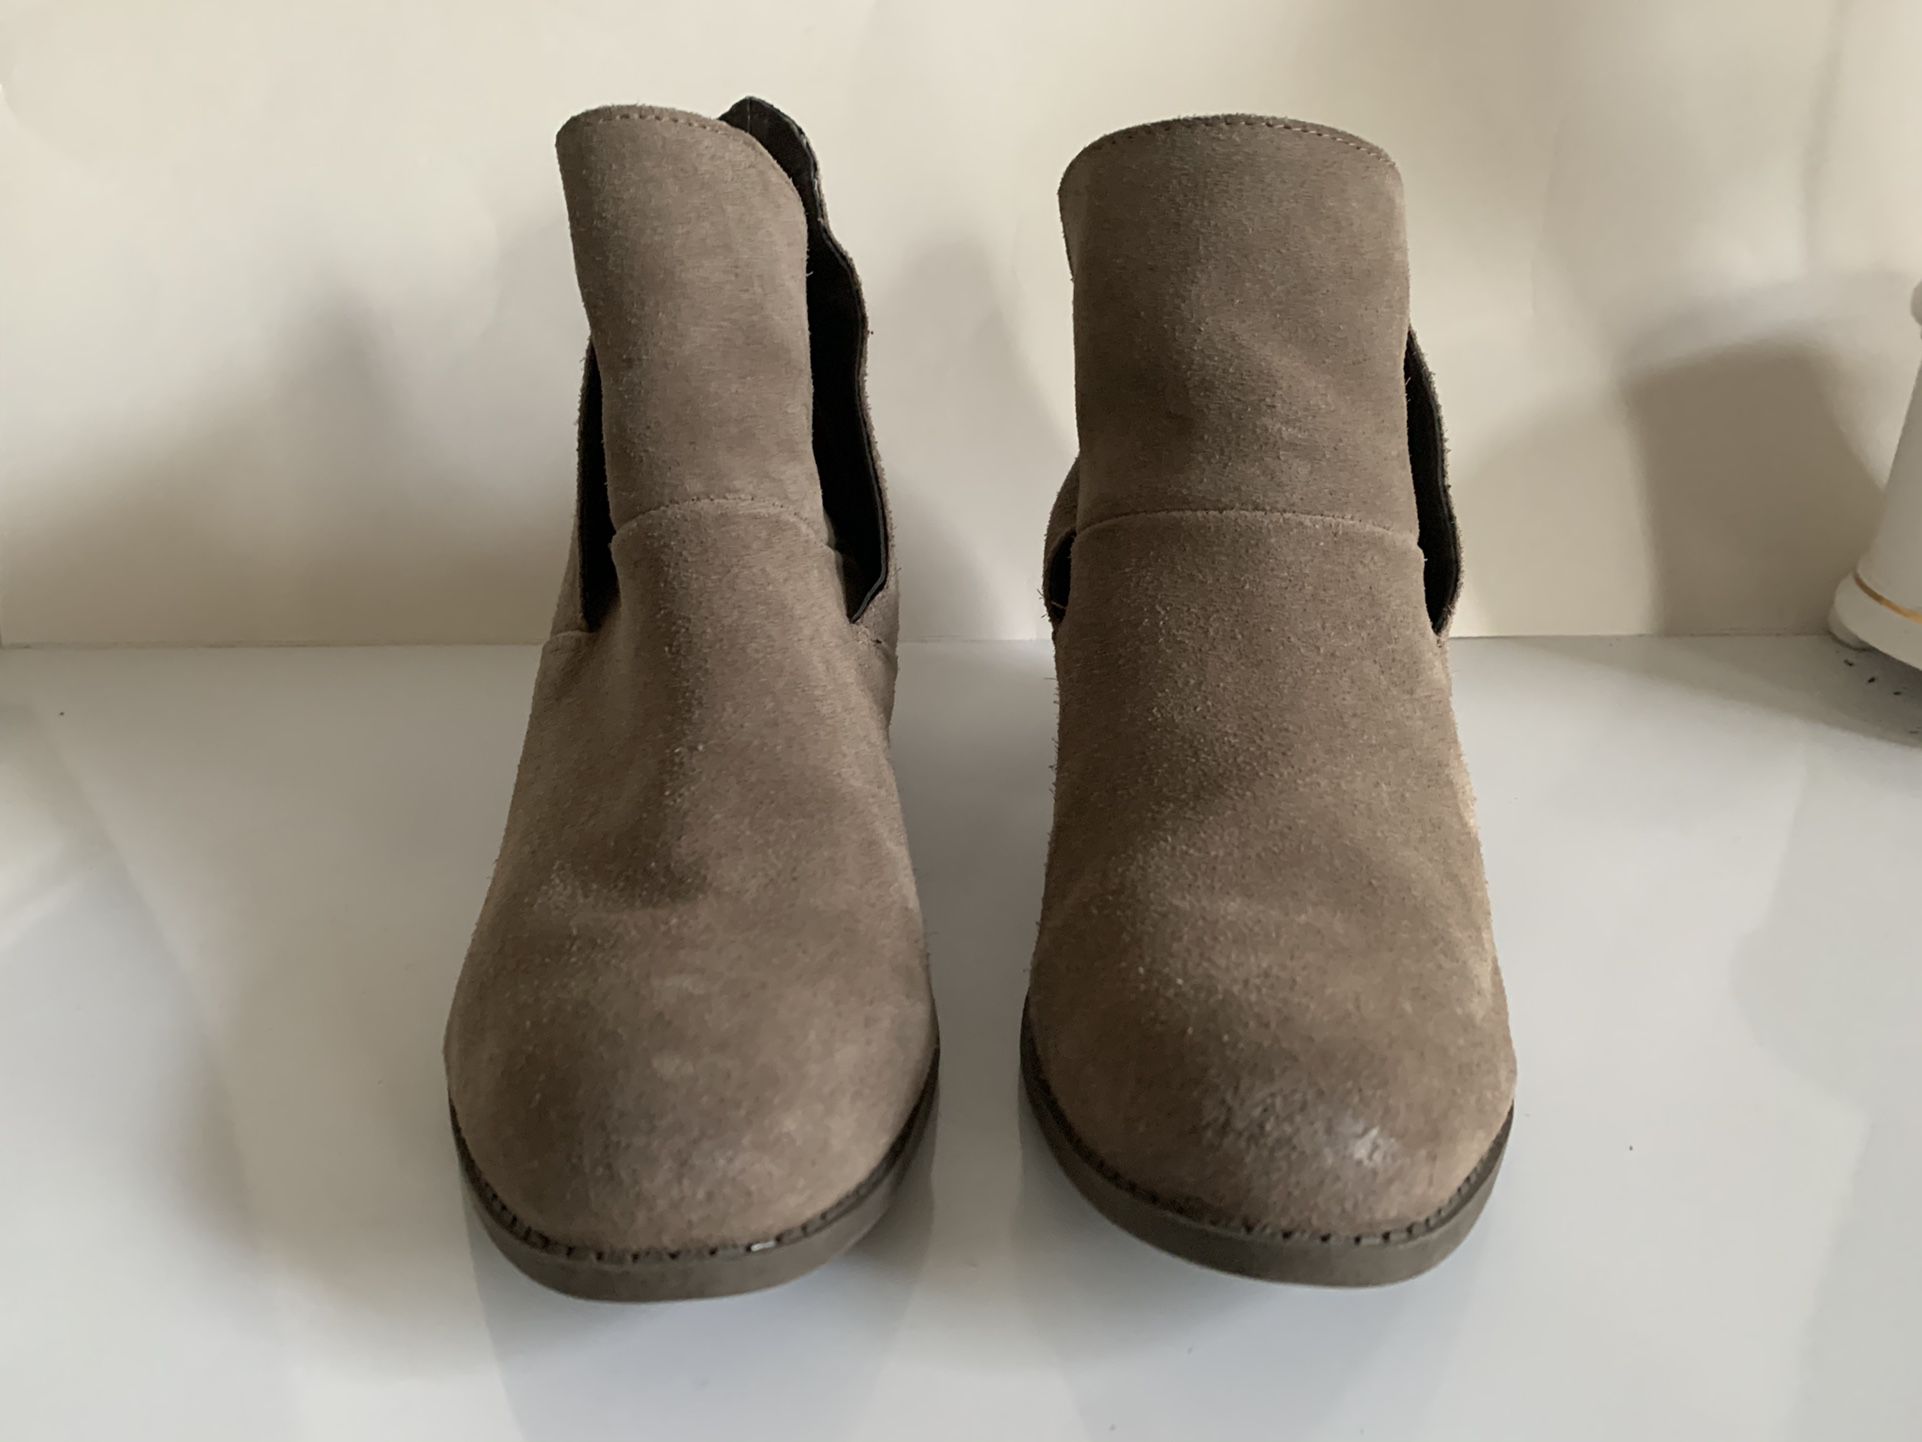 Suede Boots Size 8.5 Preowned In Very Good Condition Mushroom Color.